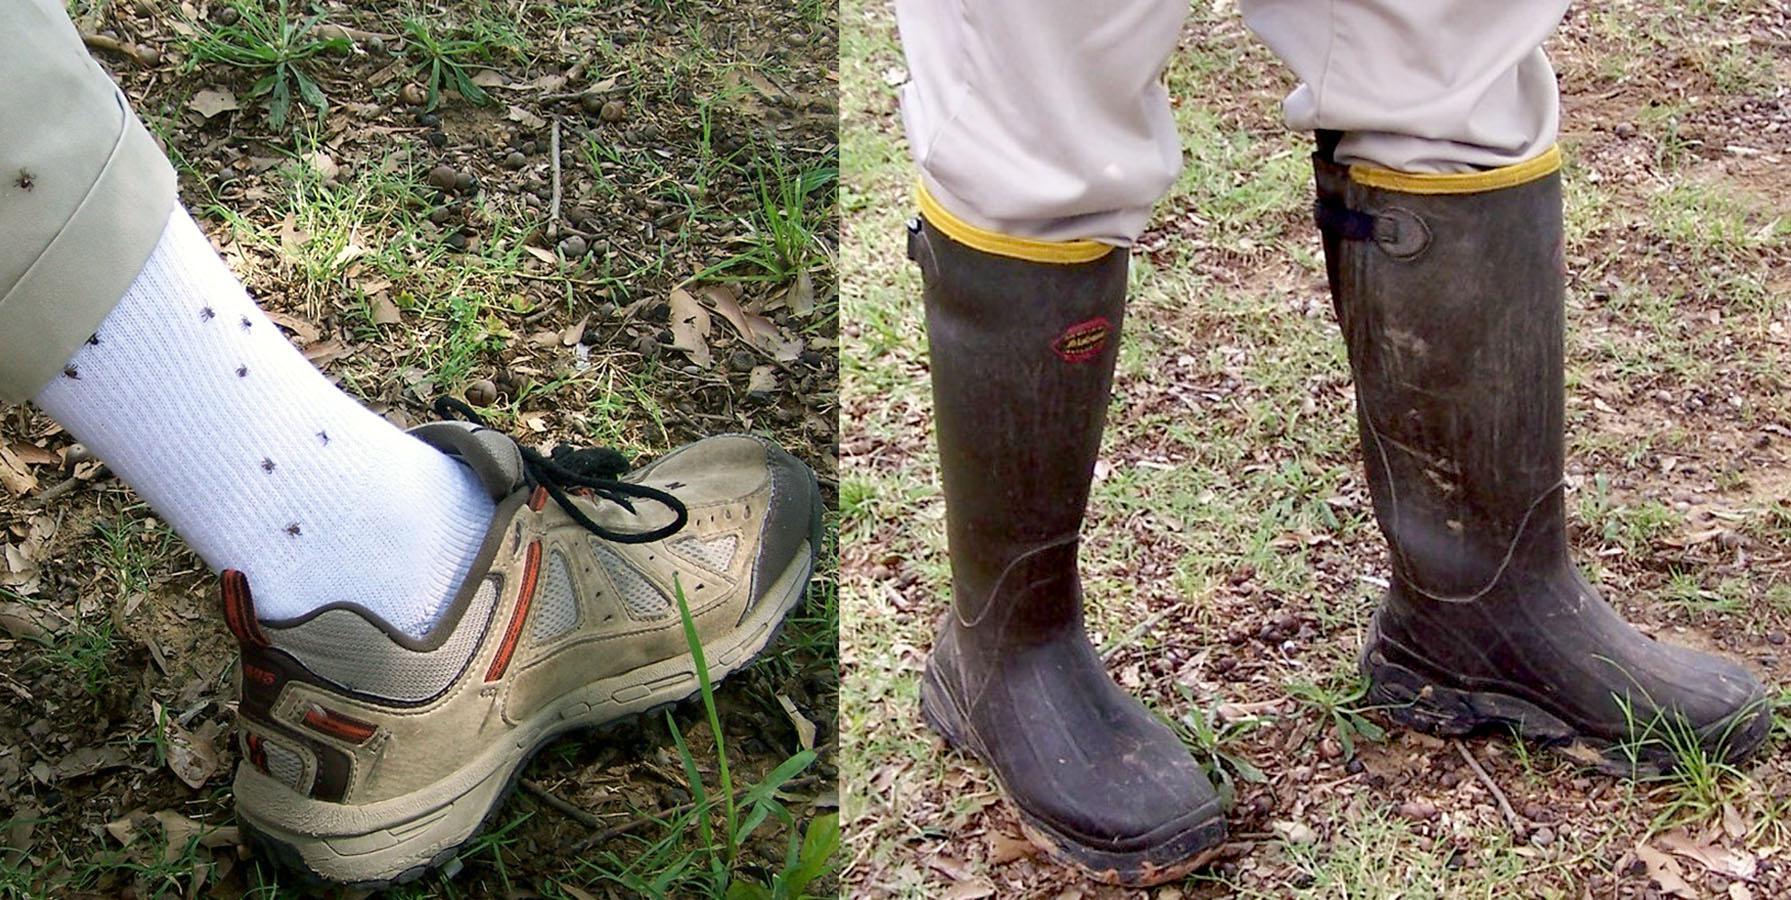 To minimize tick exposure, wear rubber boots and tuck pant legs into the boots so ticks cannot crawl onto clothing, advise Mississippi State University experts. (Photos by Jerome Goddard)